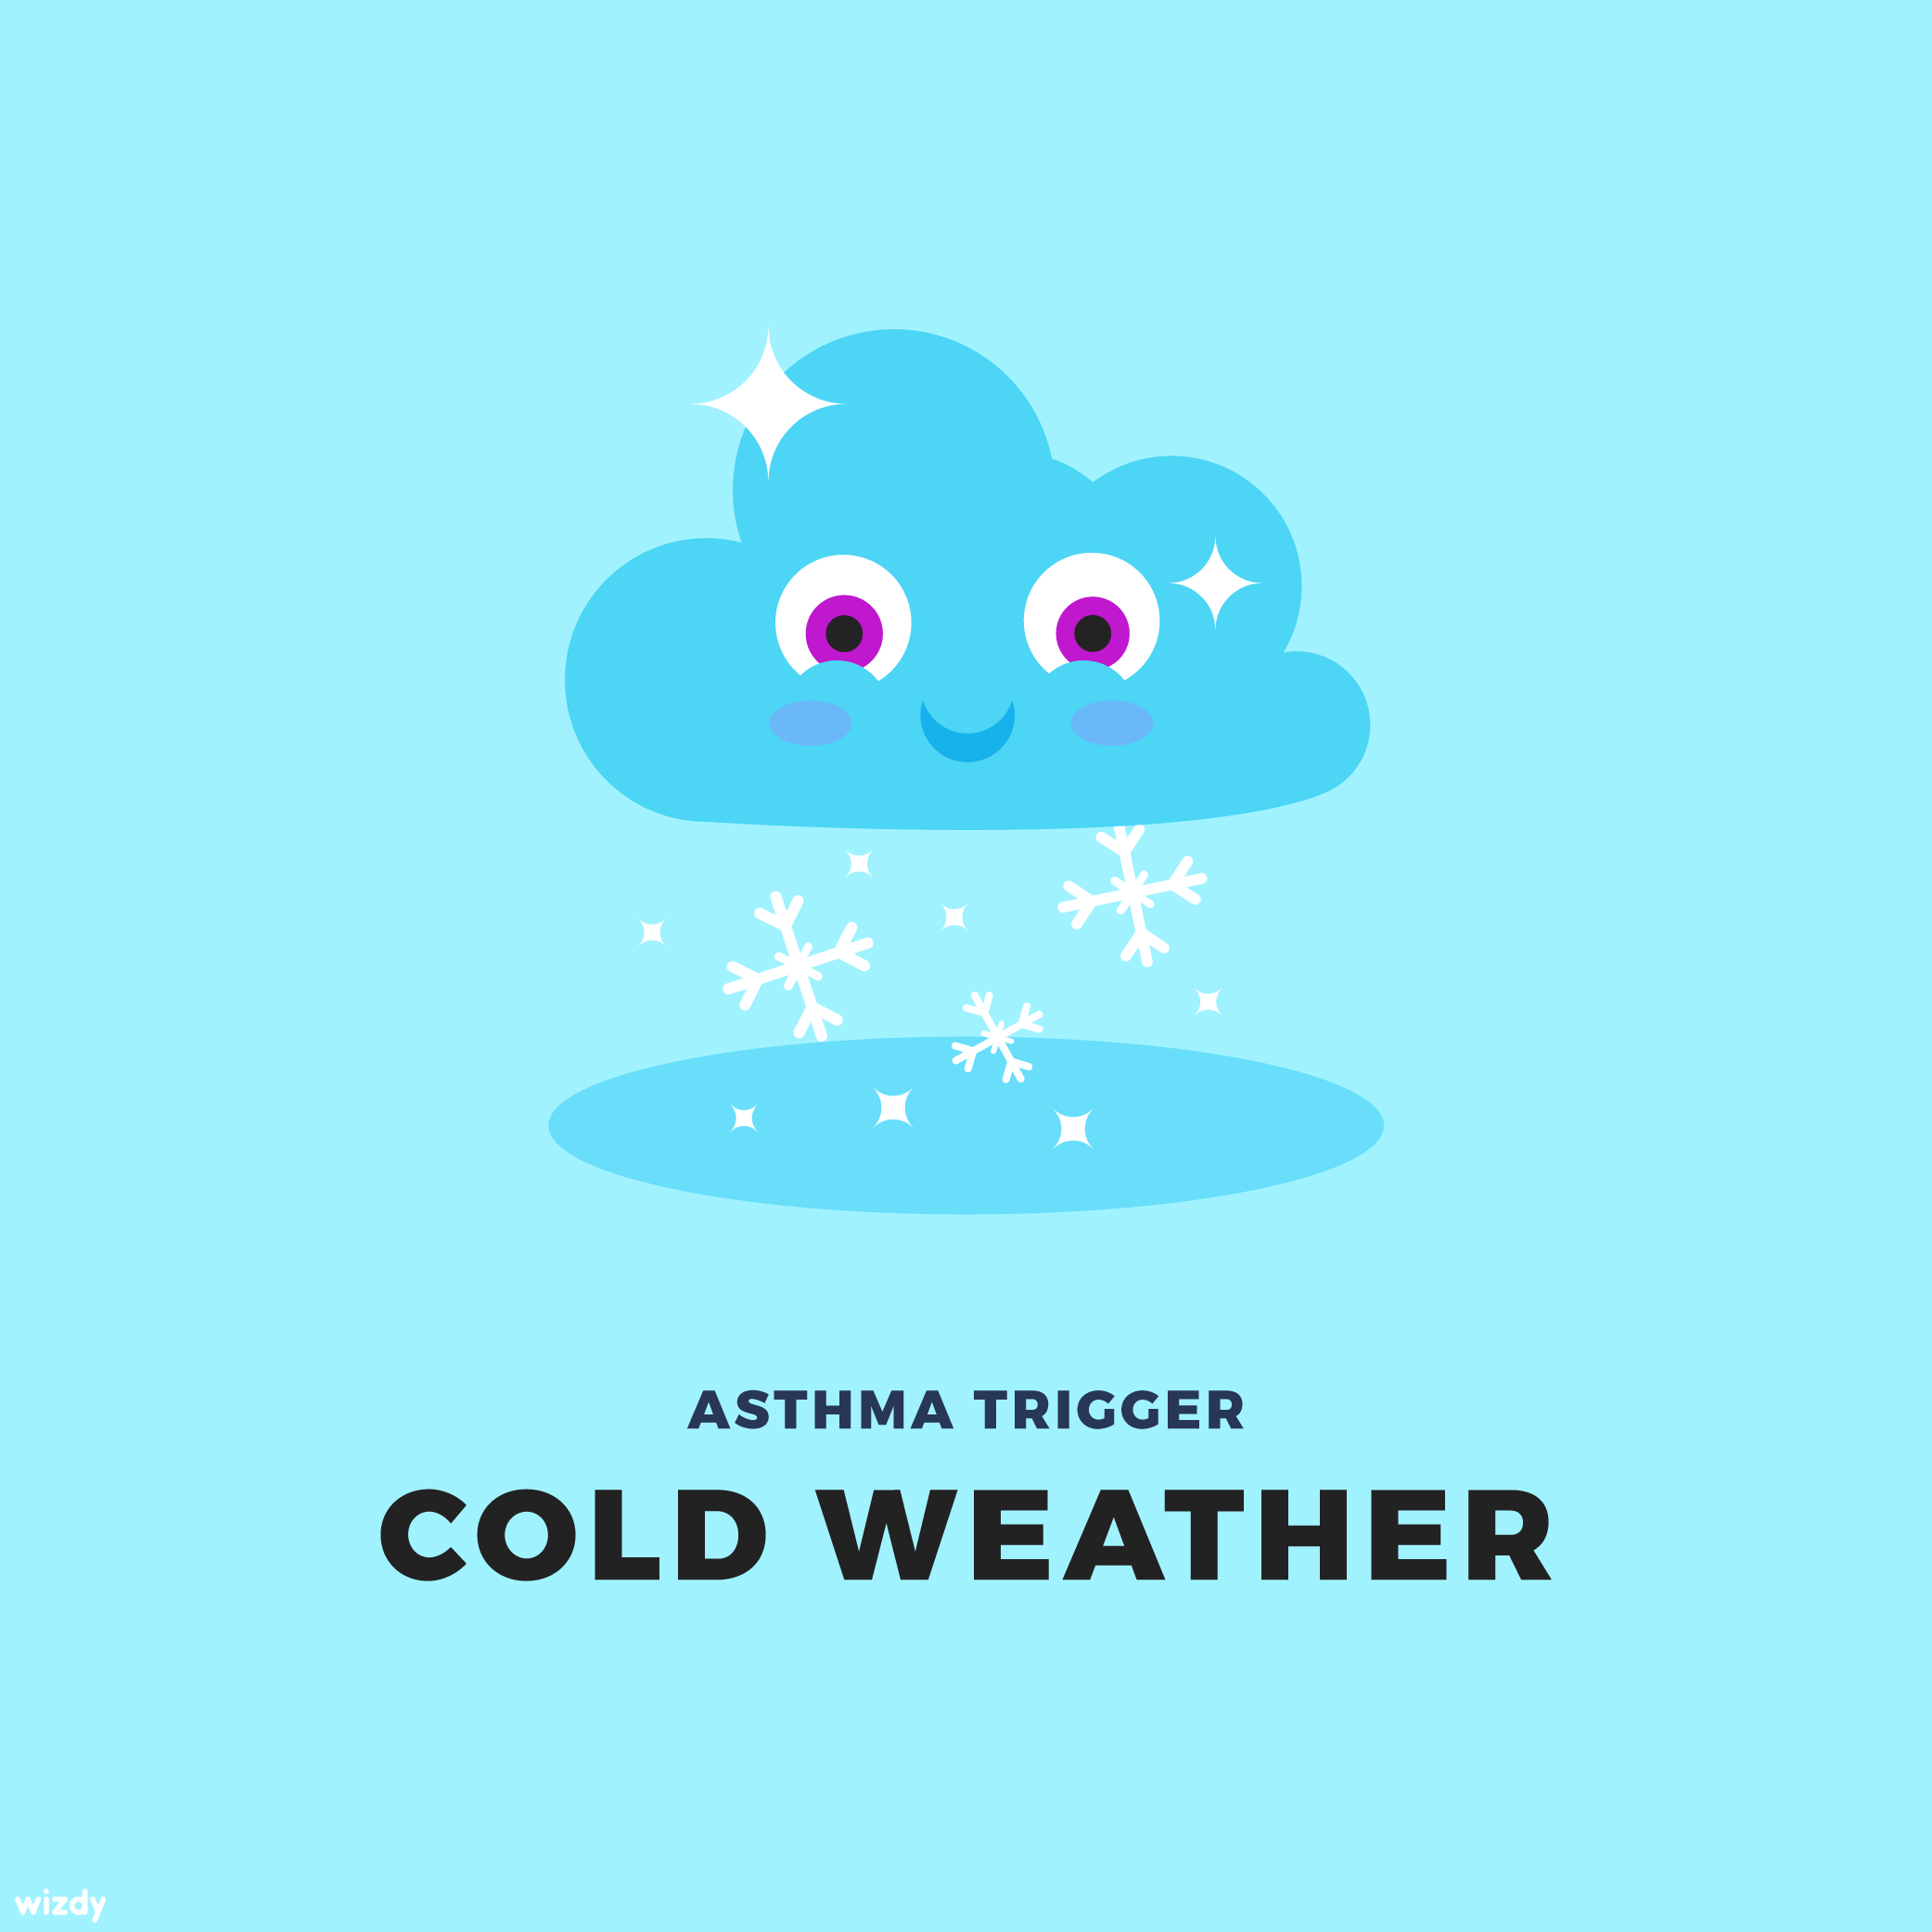 Did you know that cold weather is an asthma trigger? The ...